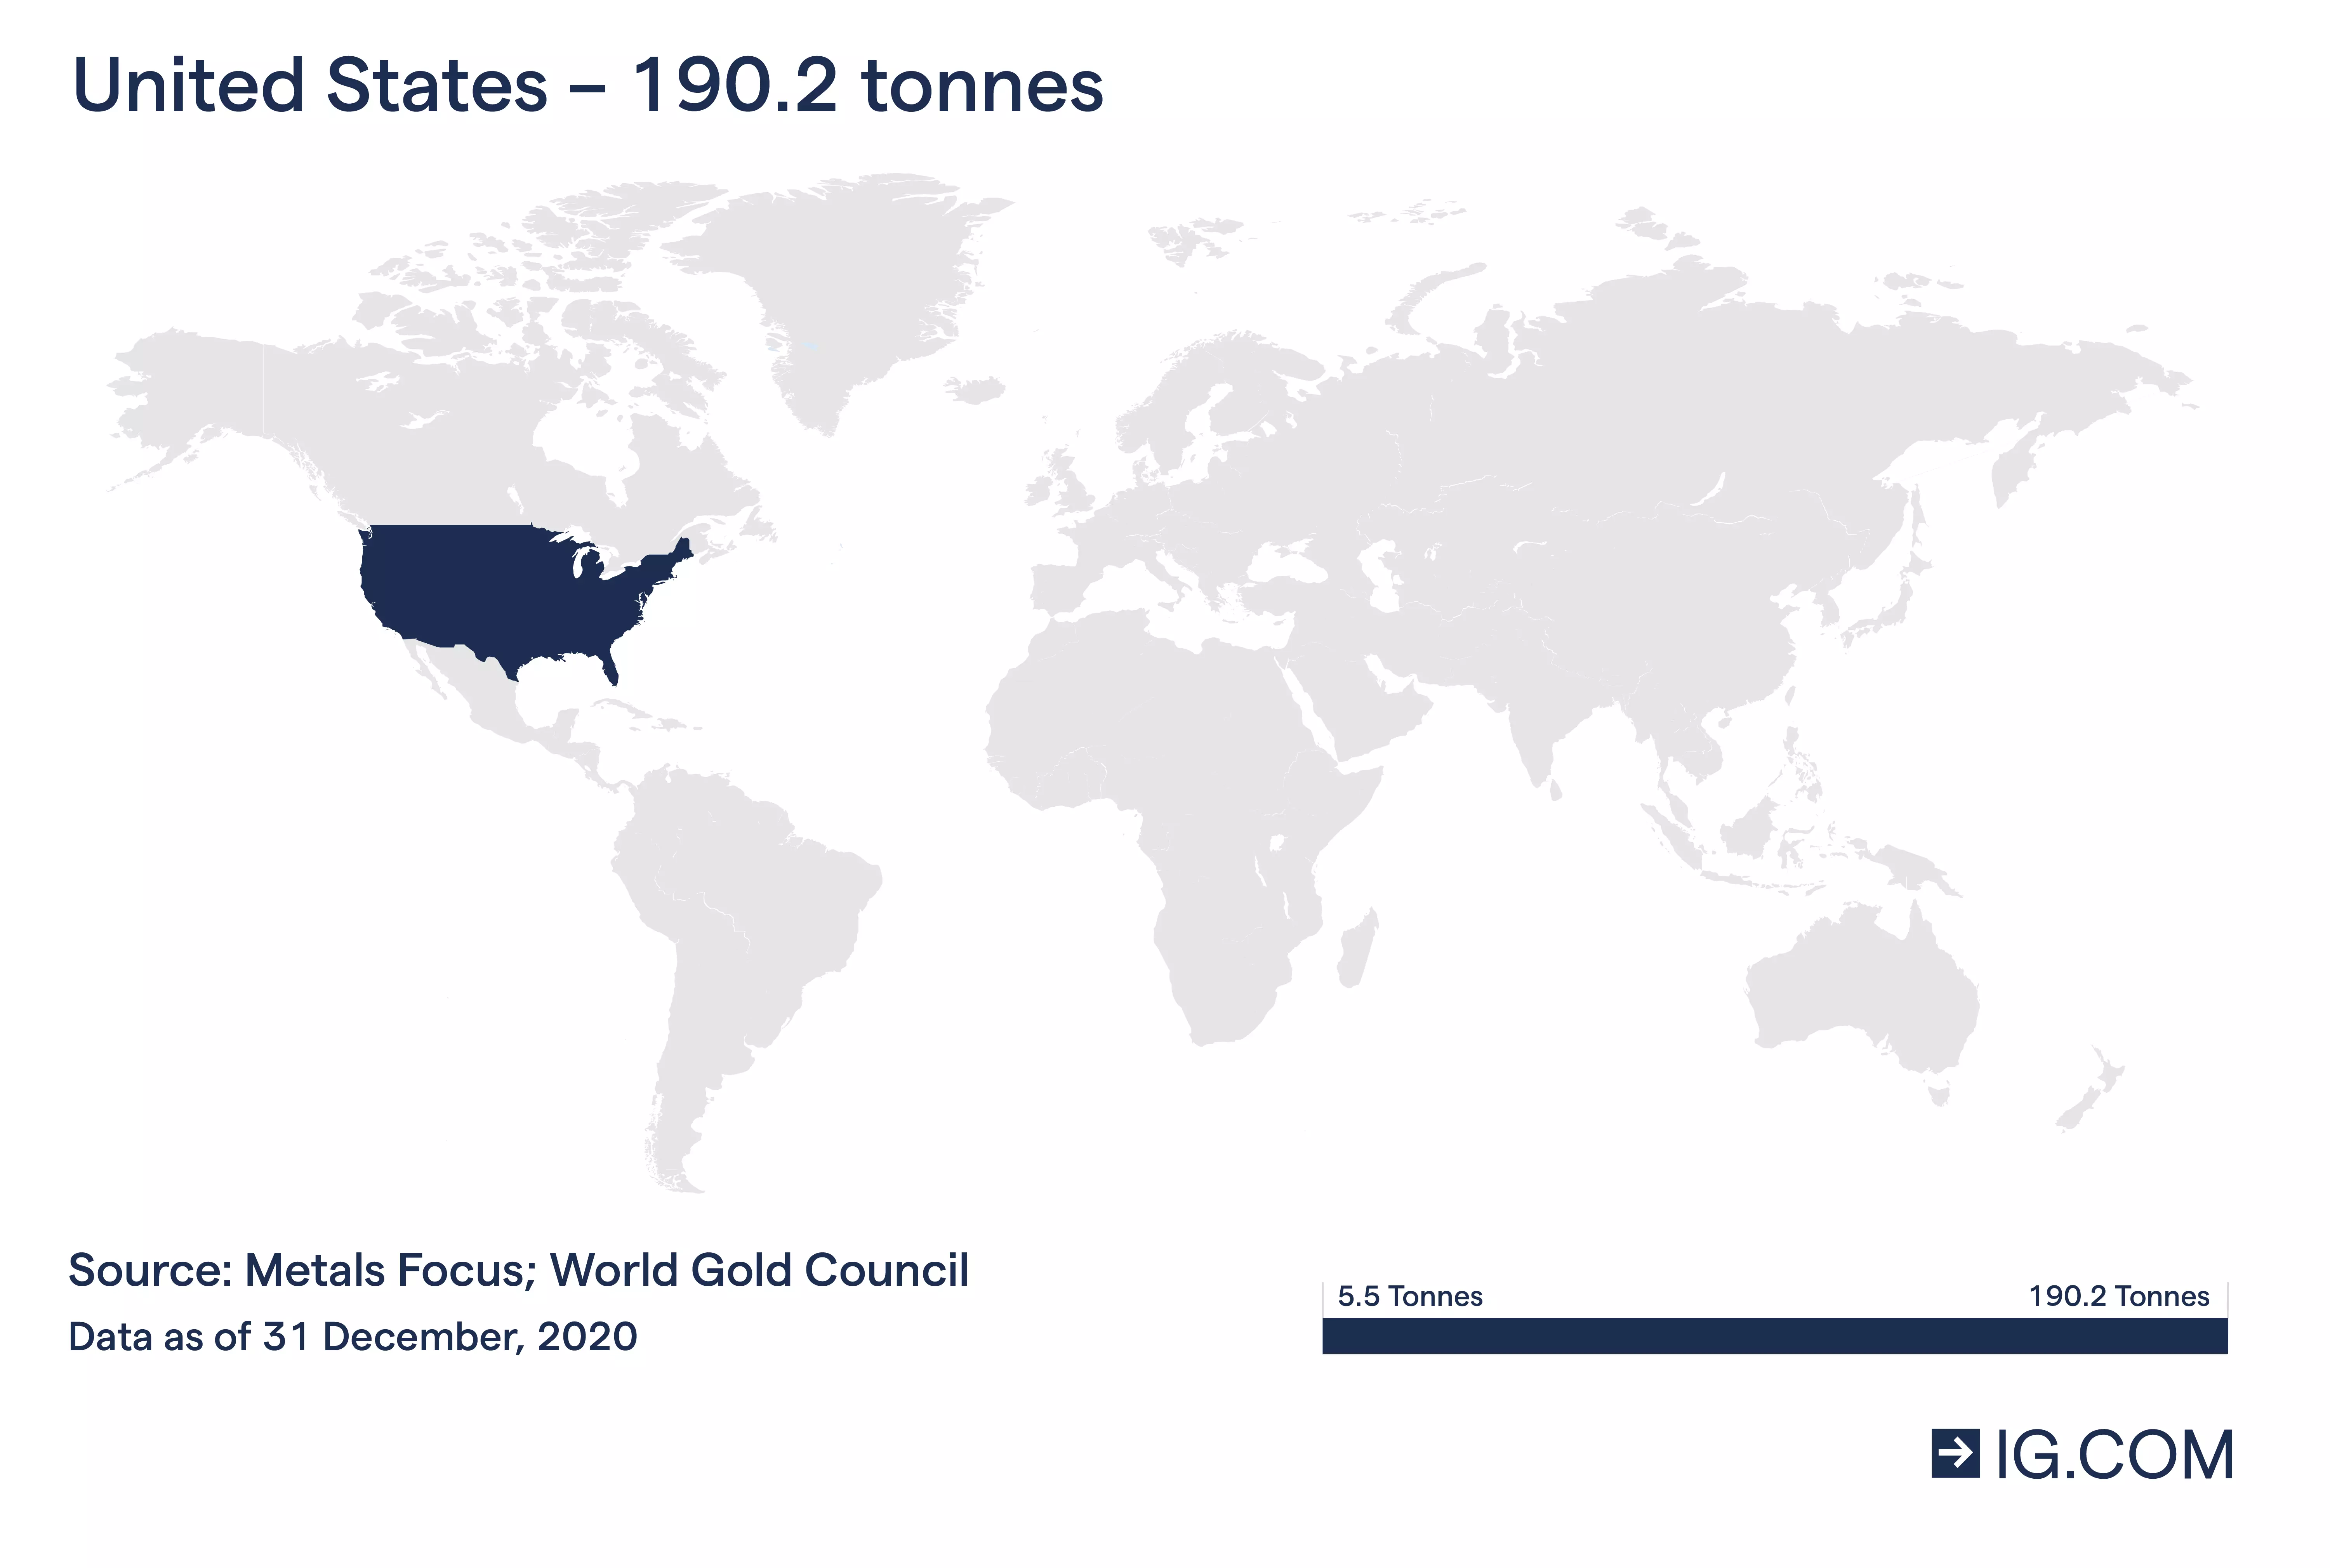 World map showing the contour of the United States as the world’s fourth largest gold producer